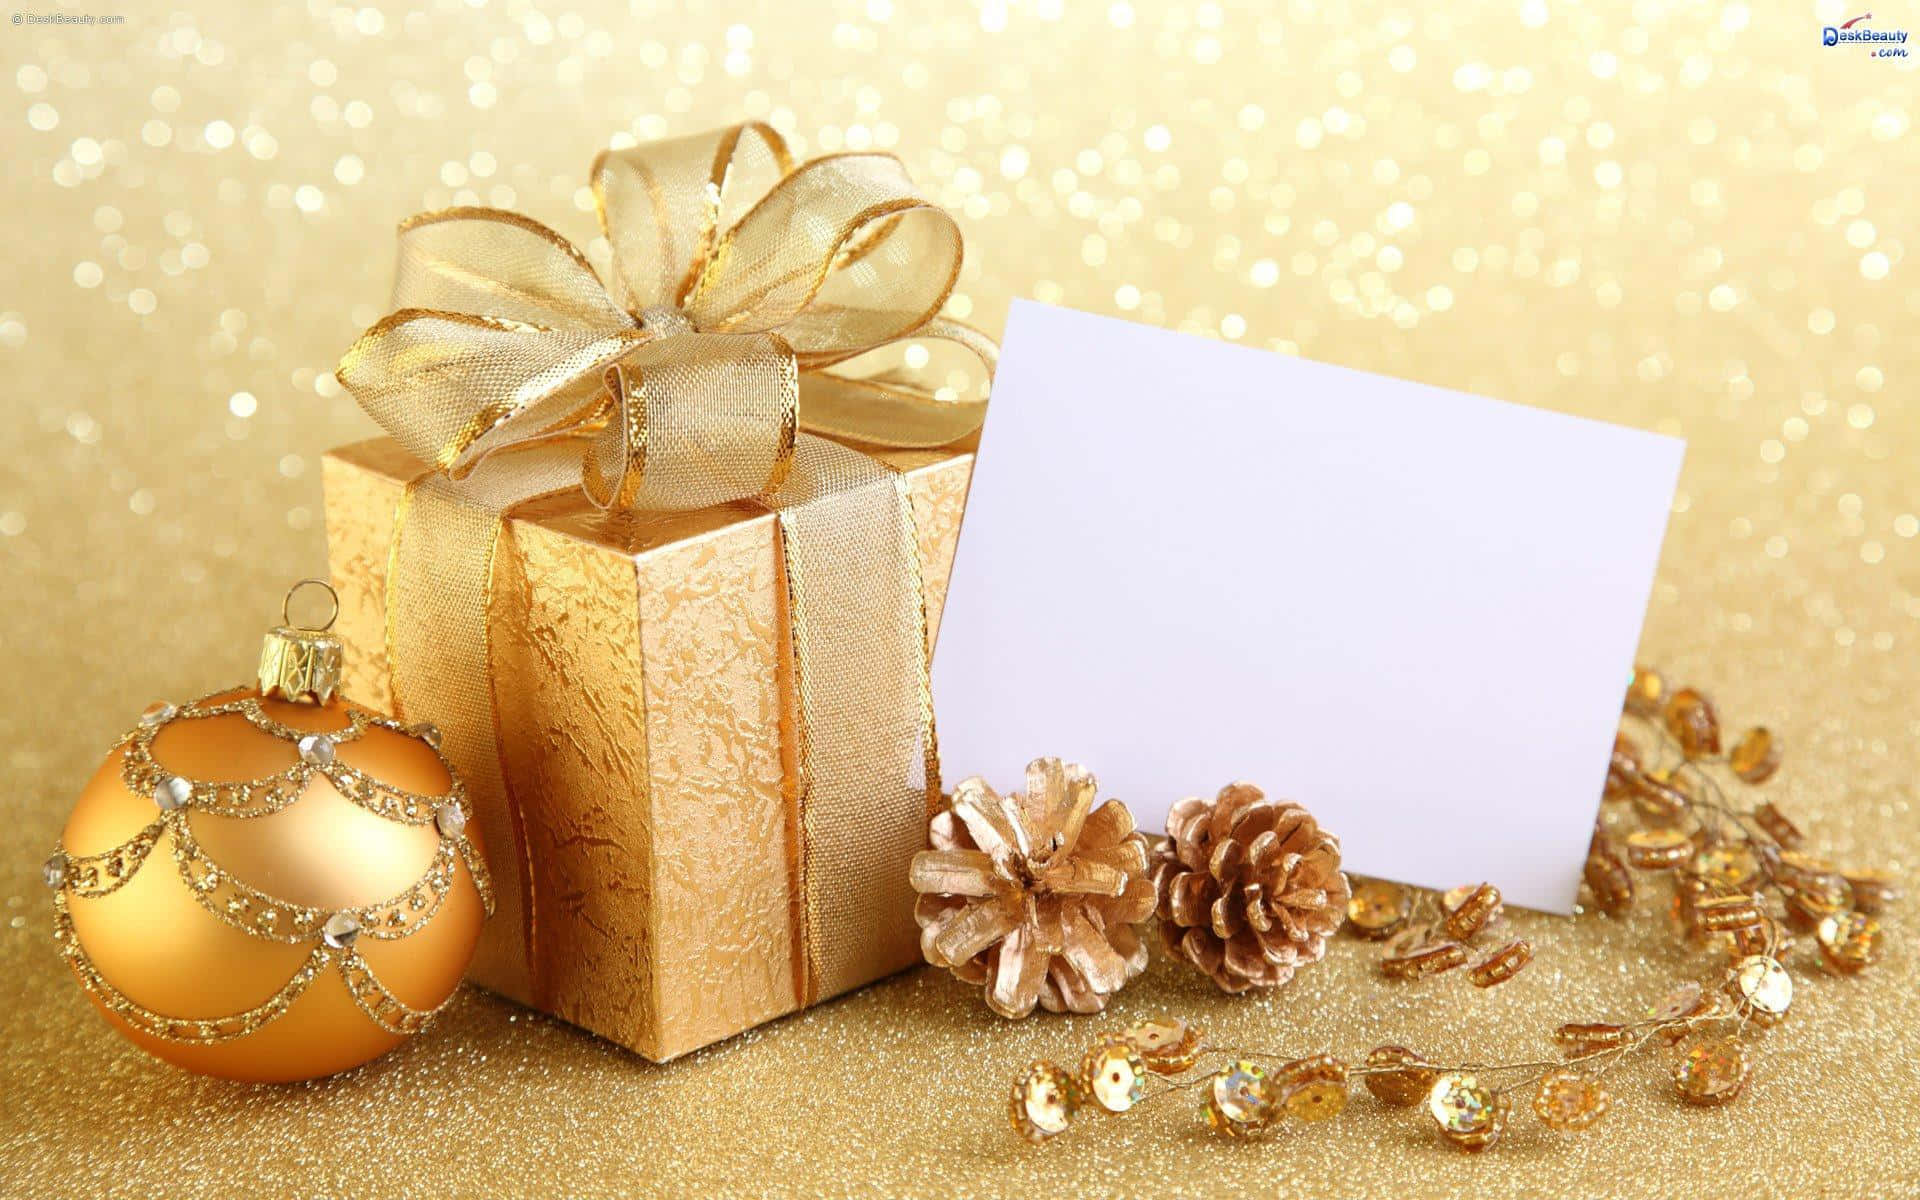 Celebrate Christmas by sending special holiday cards.